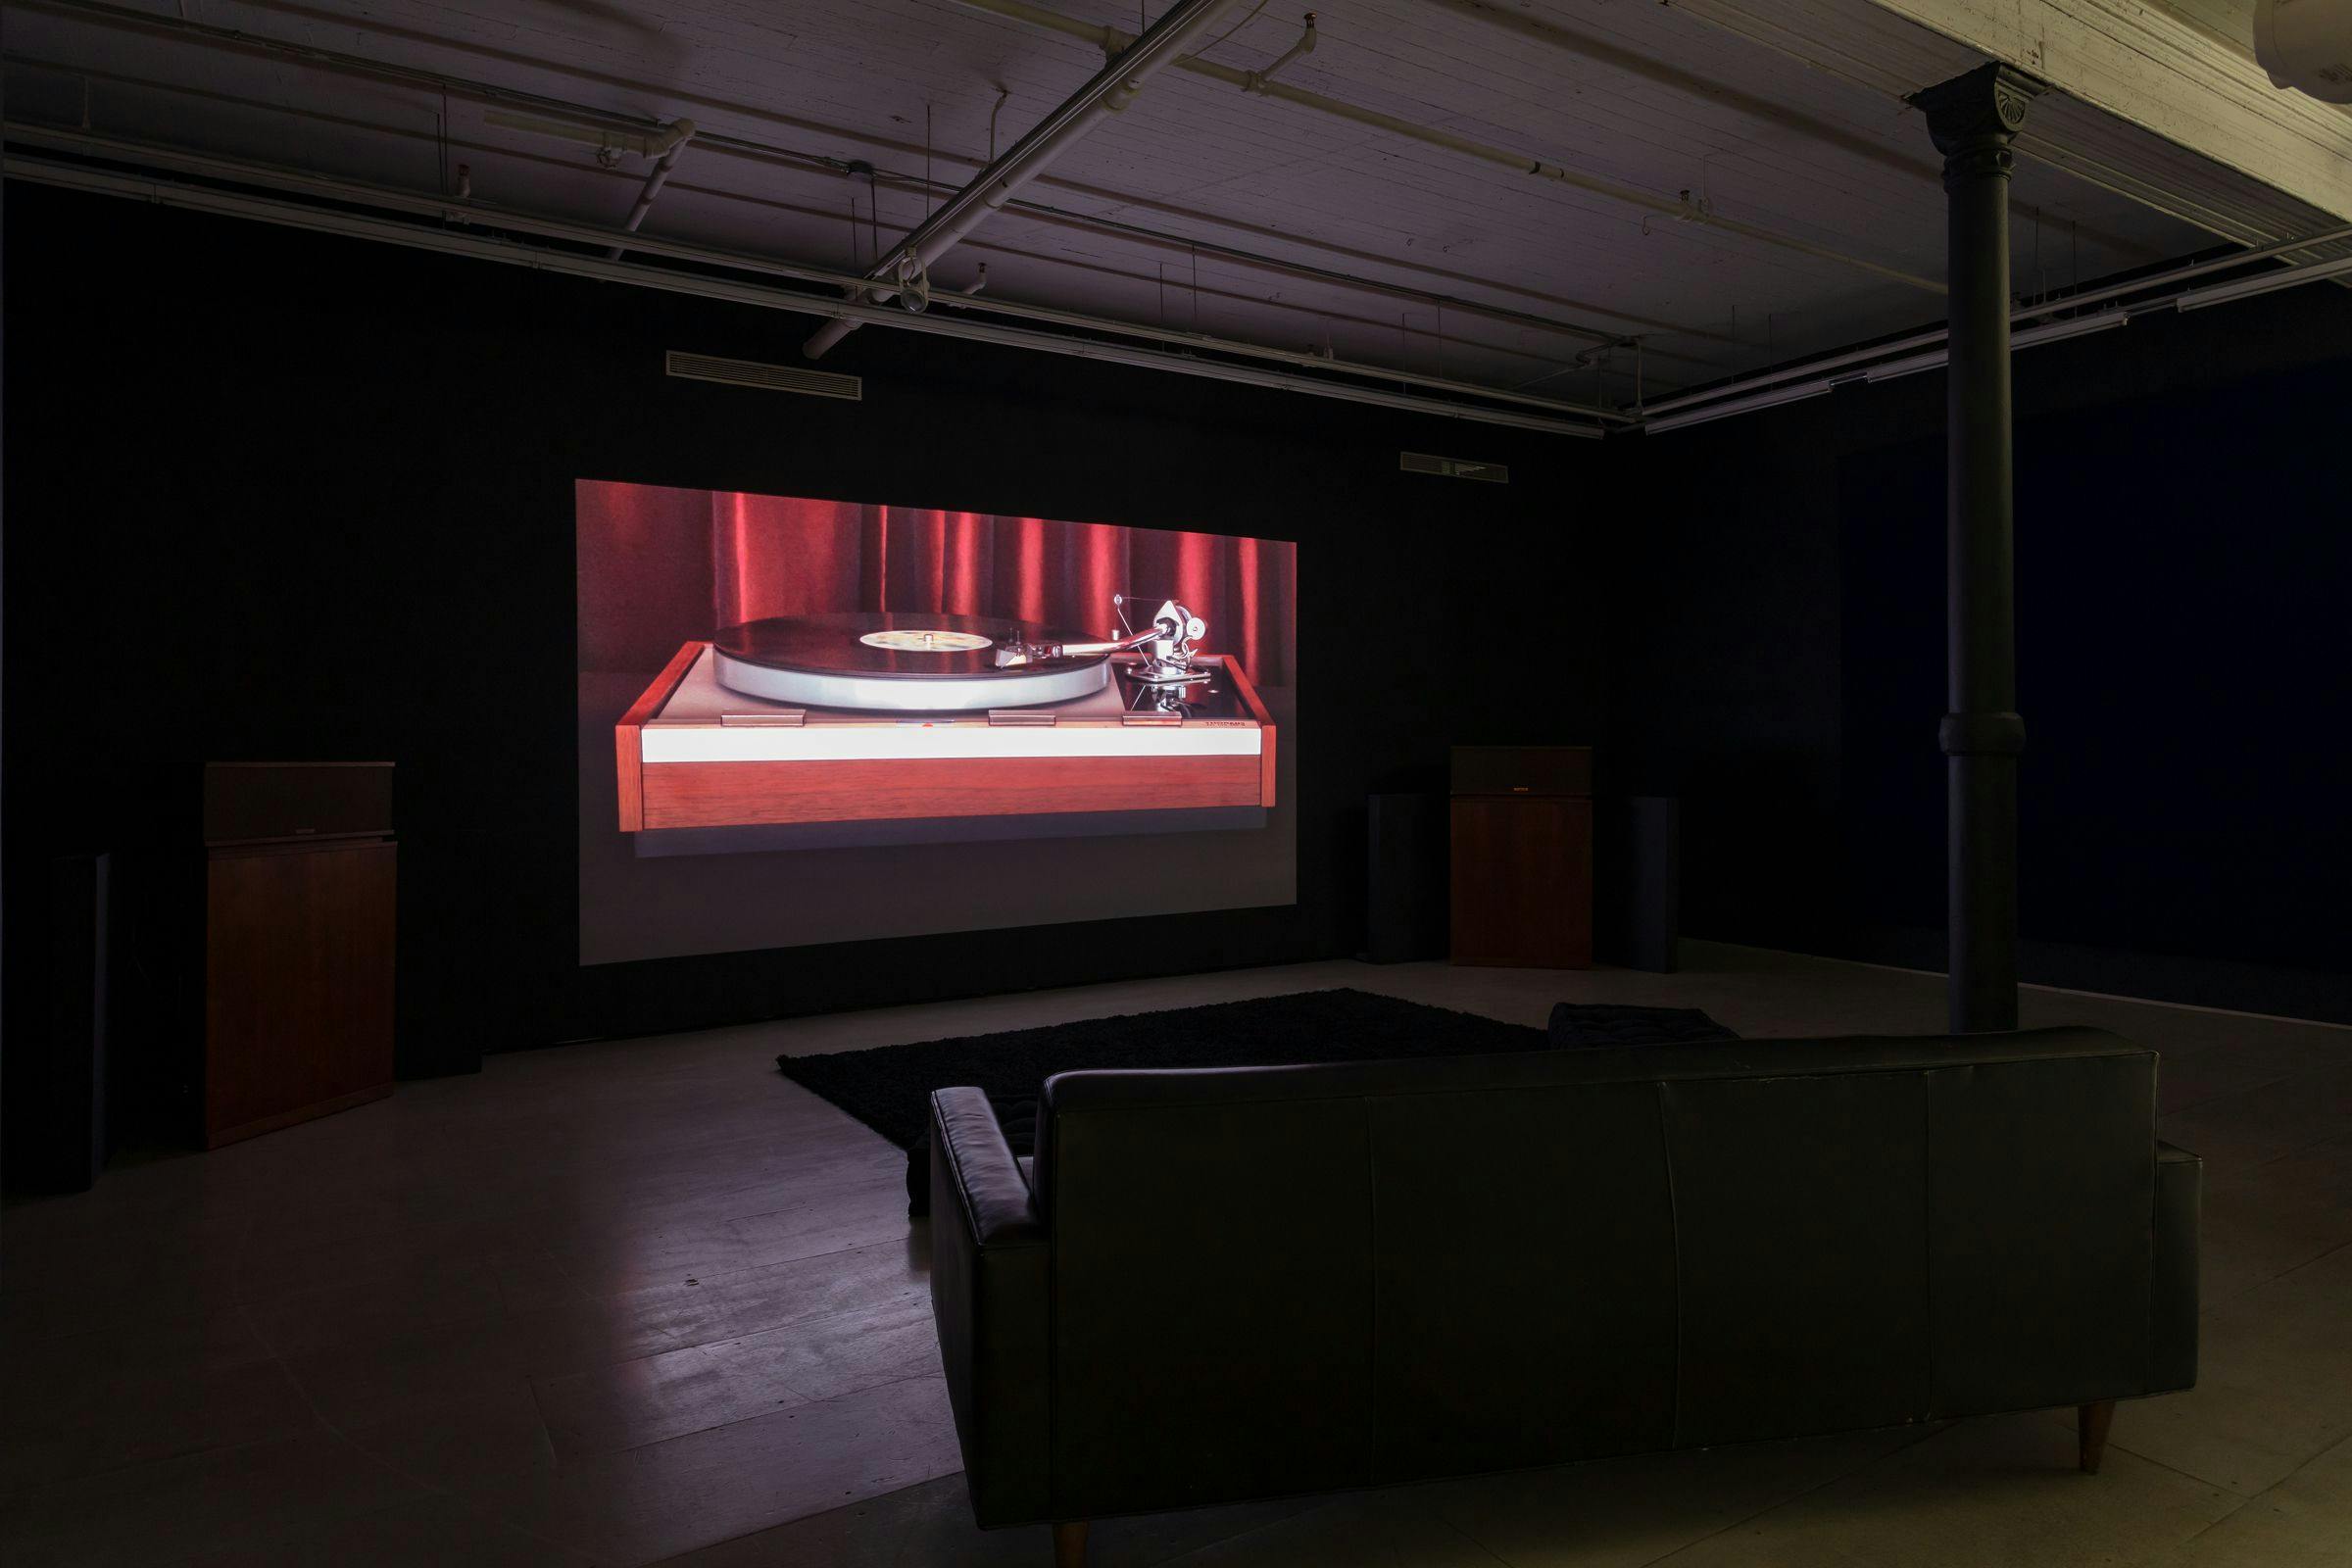 installation view of Last Night projected in a darkened gallery space. There are sofas in front of the projection and a concrete column is visible in the foreground.